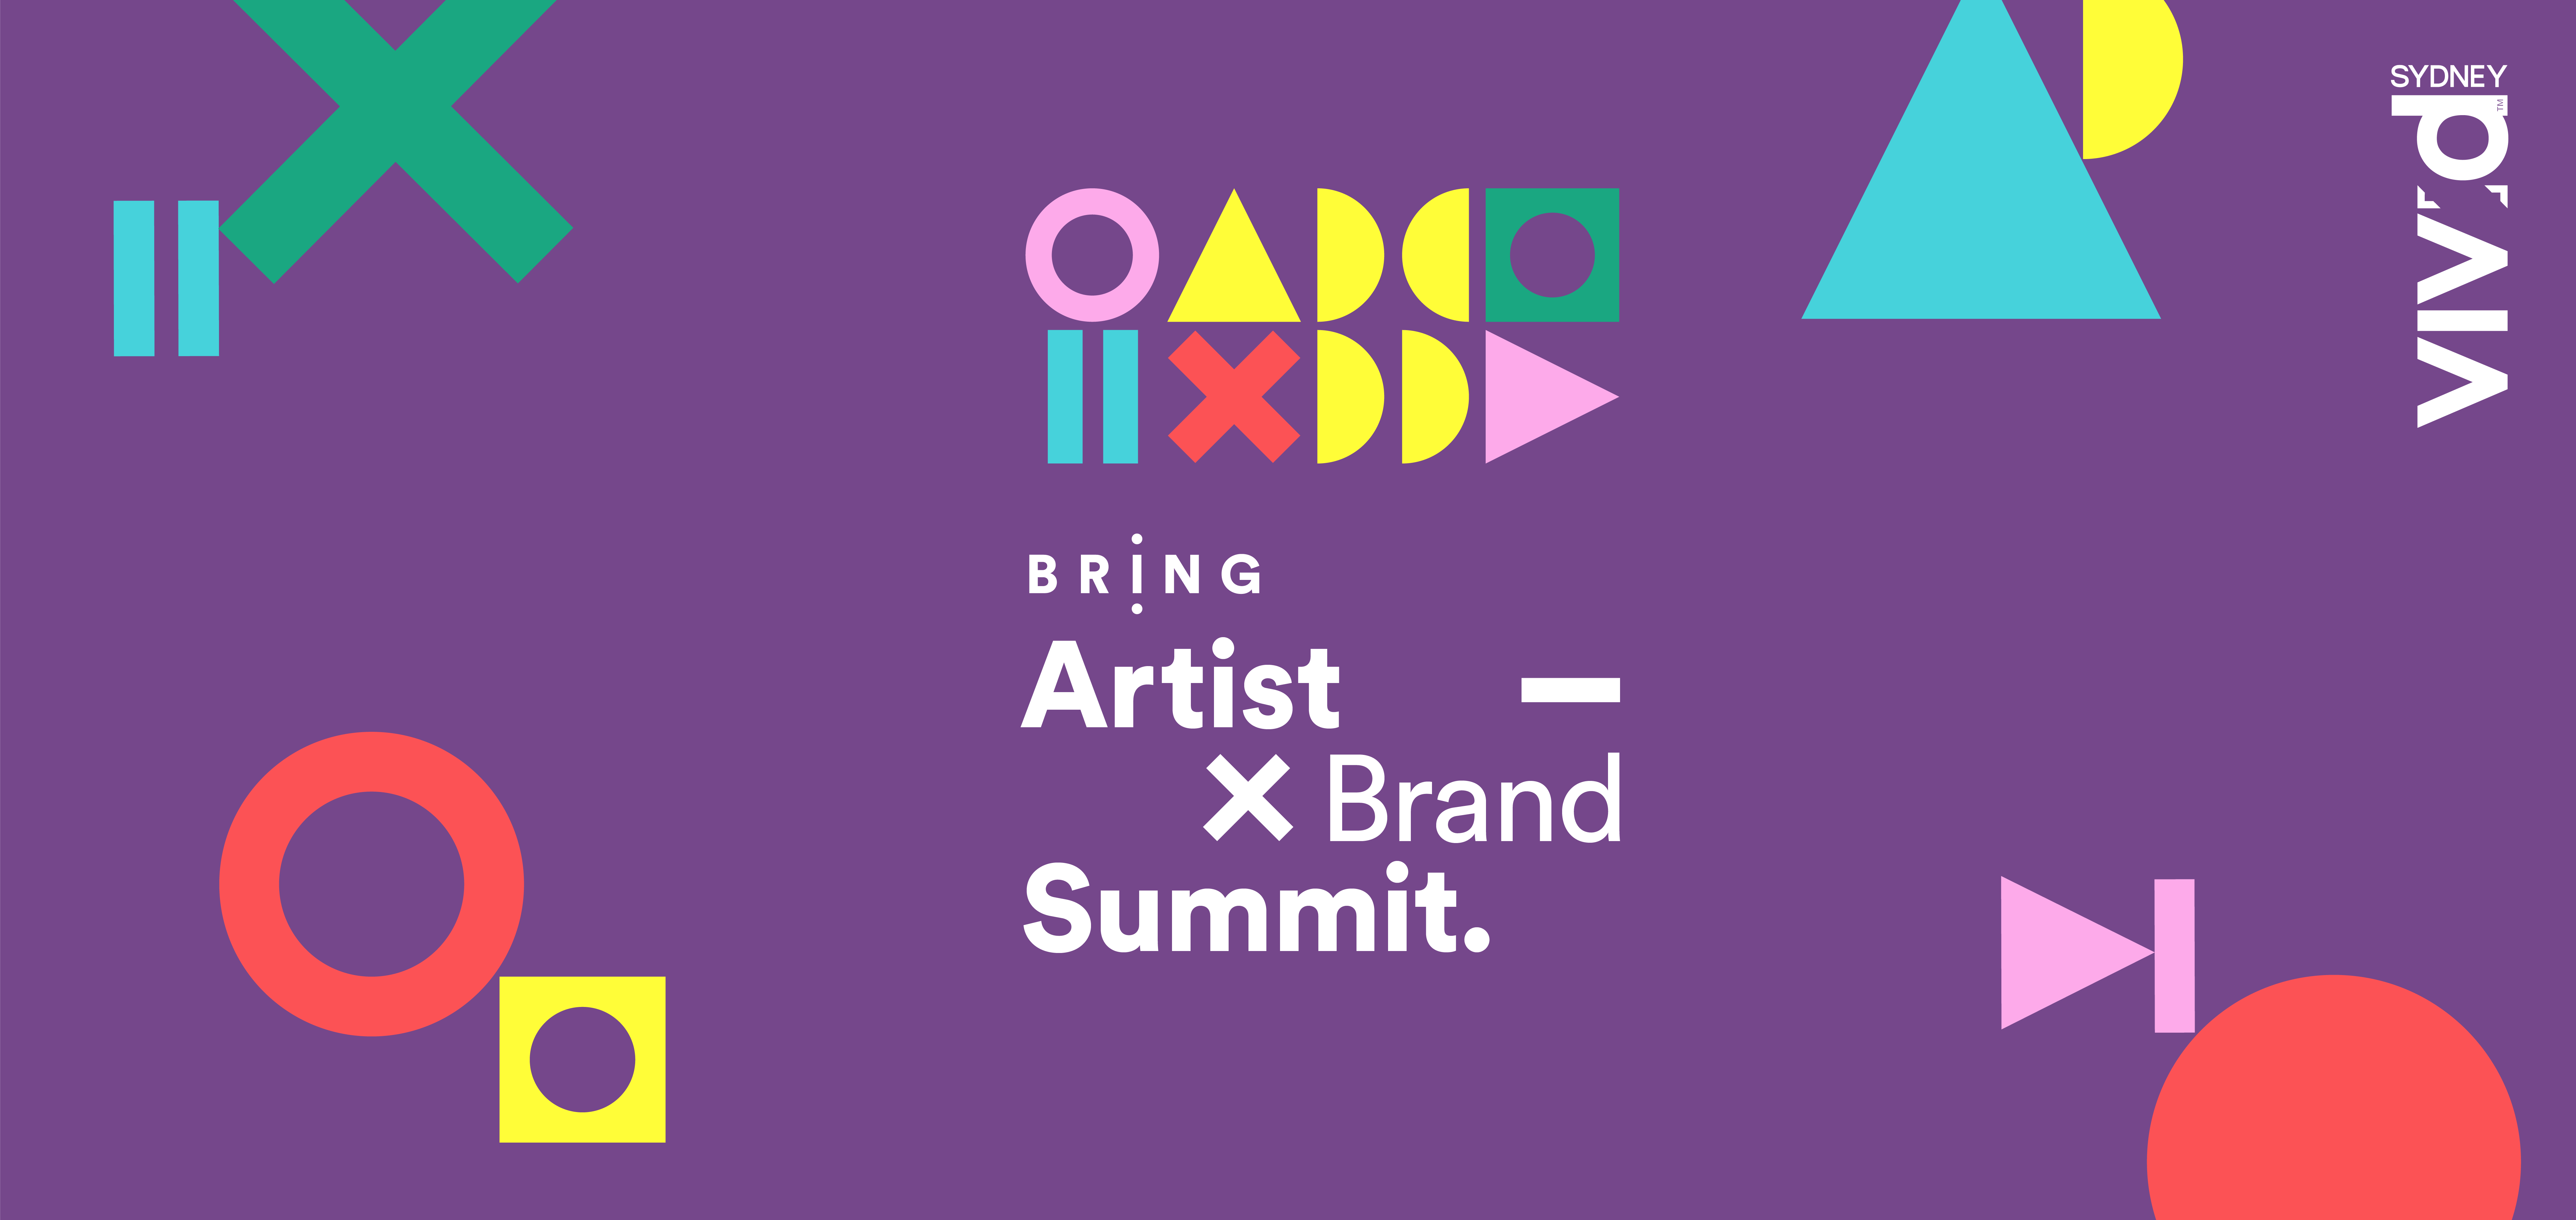 Universal’s BRING to host Artist & Brand Summit as part of revived Vivid event